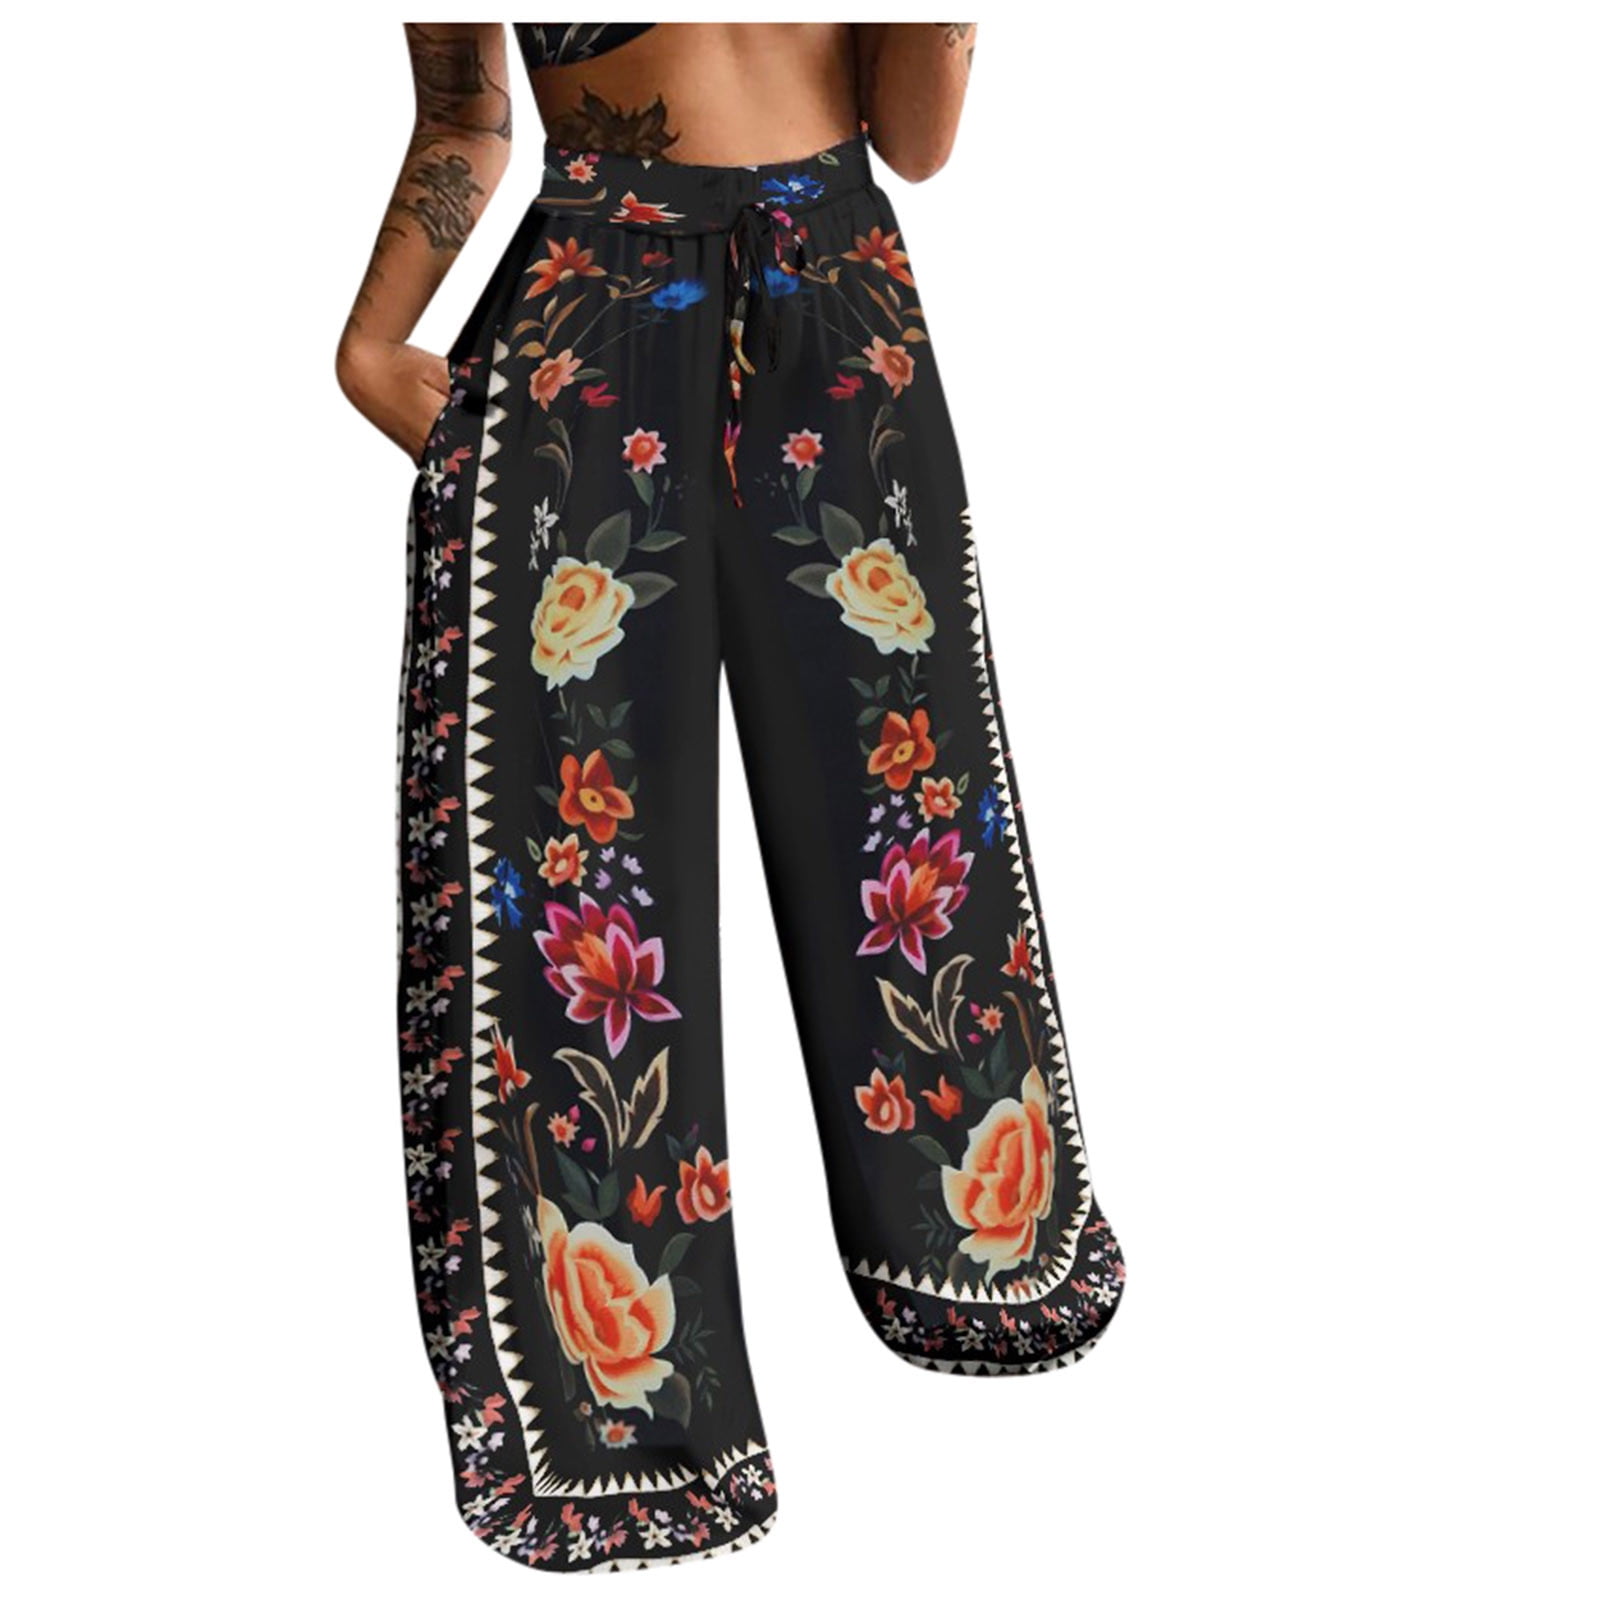 Deals of the Week ! BVnarty Discount Harem Pants for Women Fashion Fall  Winter Long Trousers Aztec Etnic Graphic Comfy Lounge Casual Loose Cozy  Elastic Waist Boho Style Pocket Black L -